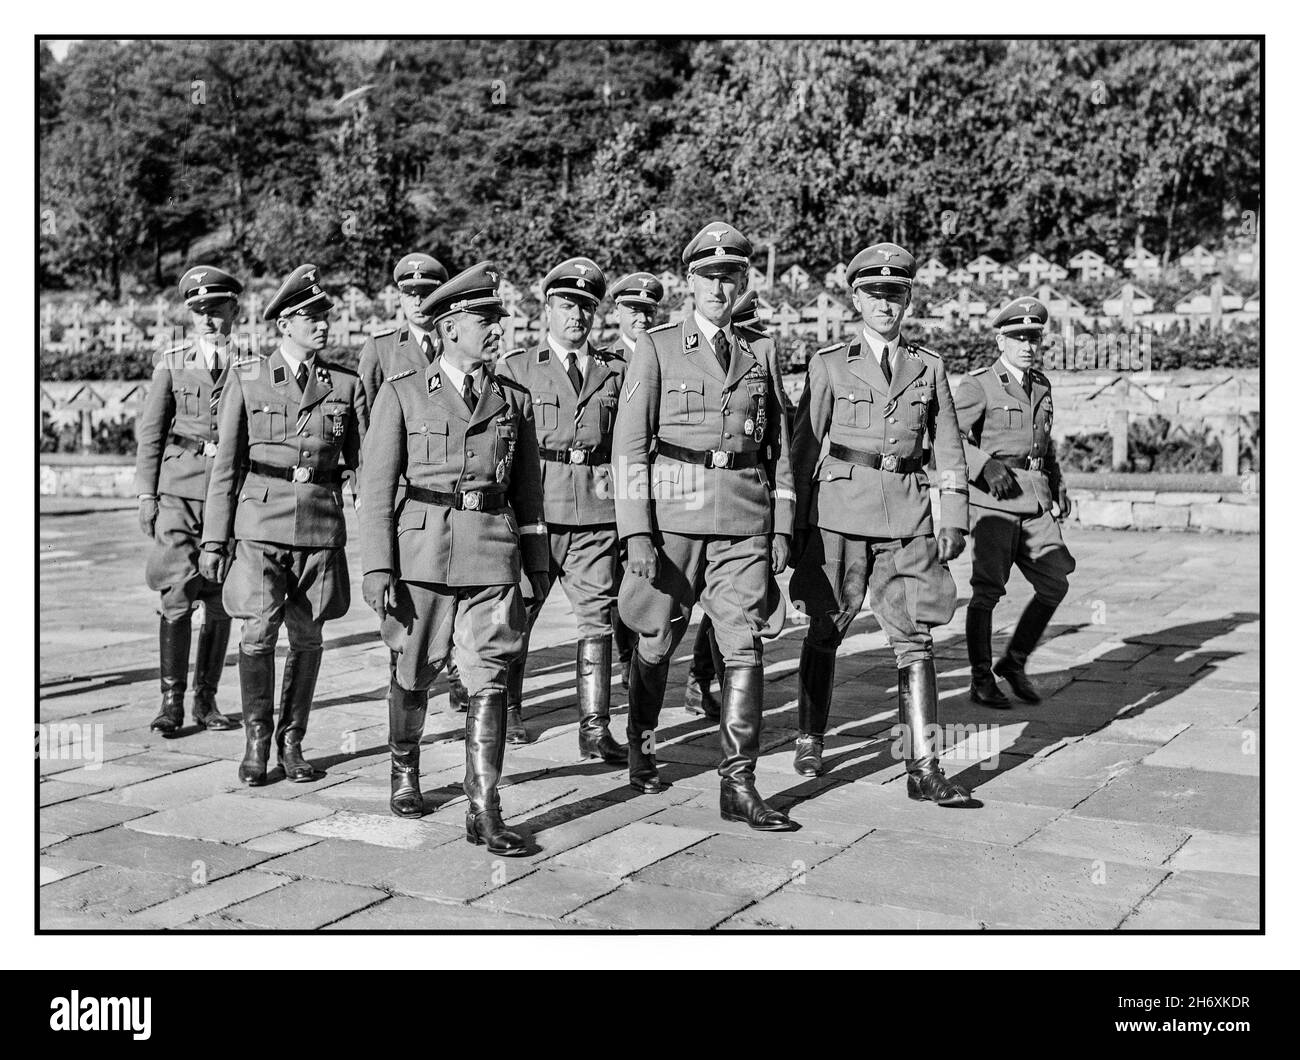 Nazi Propaganda image including Reinhard Heydrich at Ekeberg cemetery for German soldiers in Oslo during his visit to Norway 3-6 September 1941. Heydrich (1904 – 1942) was a SS-Obergruppenführer und General der Polizei (Senior Group Leader and General of Police) as well as chief of the Reich Main Security Office RSHA (including the Gestapo, Kripo, and SD). Heydrich walking in front with SS Officer Georg Wilhelm Müller [note Not SS-Brigadeführer/SS-Gruppenführer Heinrich Müller (head of the Gestapo)] to his right and SS Oberführer Heinrich Fehlis (leader of SD and Sipo in Norway) to his left. Stock Photo